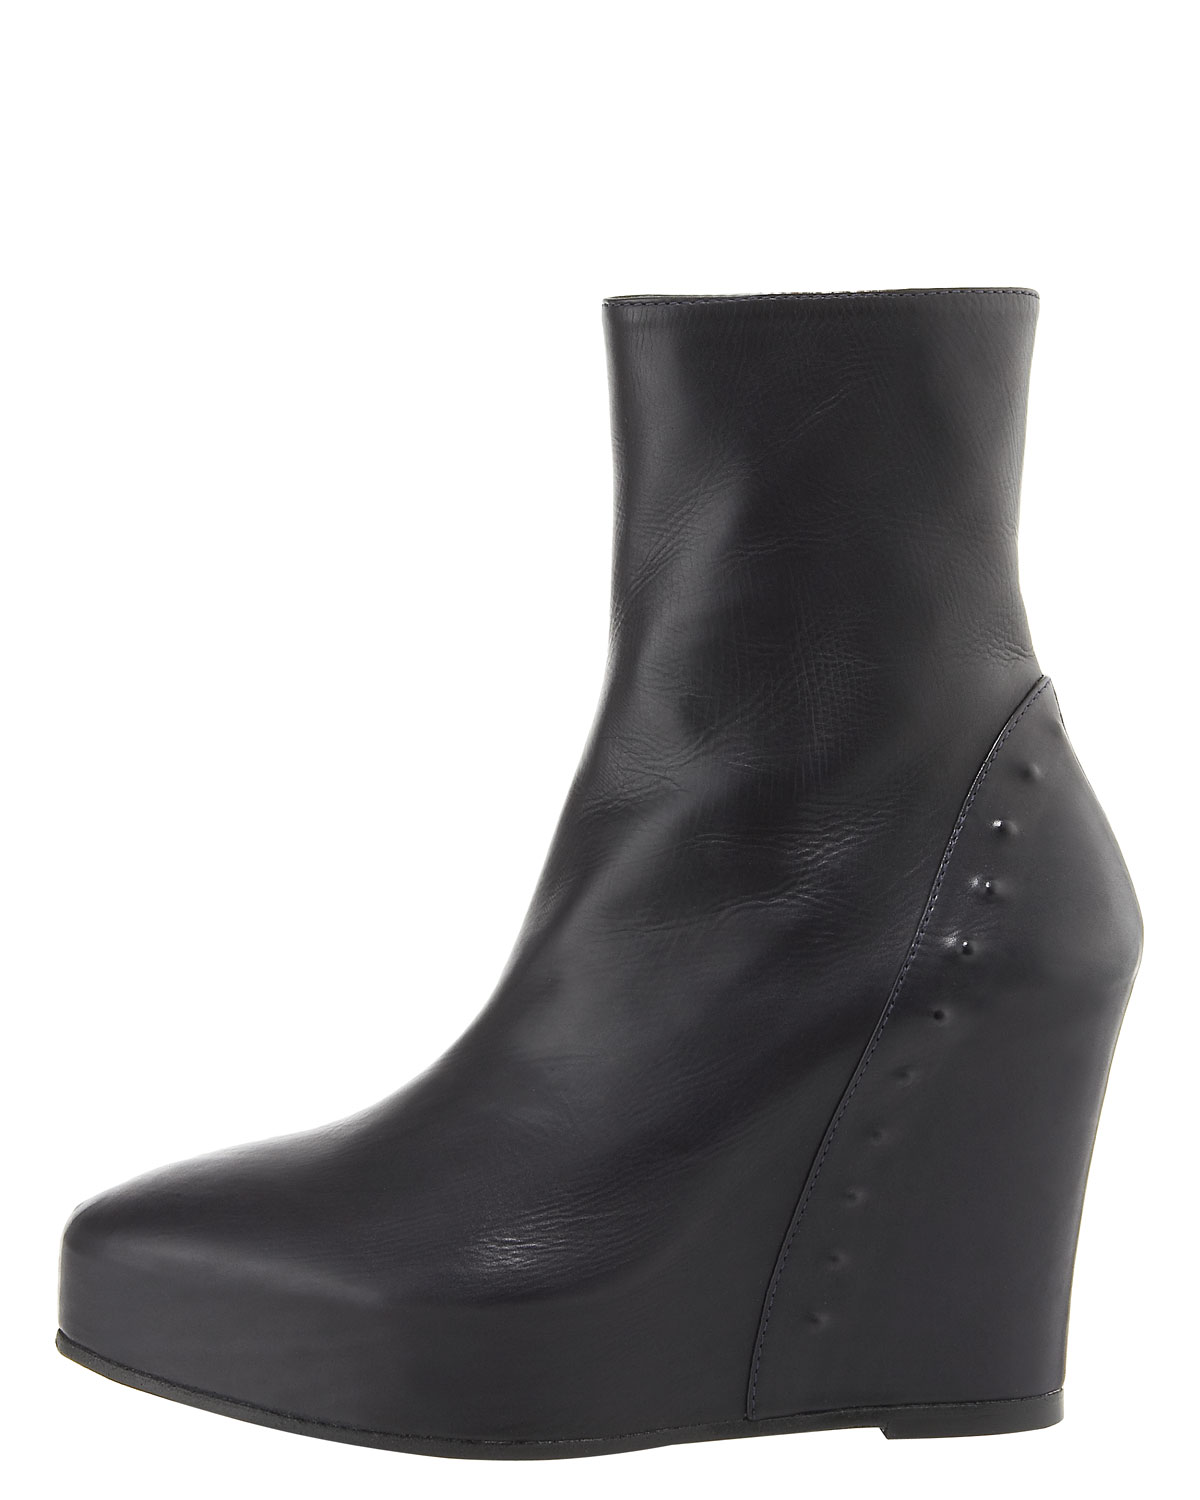 Ann Demeulemeester Self-stud Wedge Ankle Boot in Black - Lyst